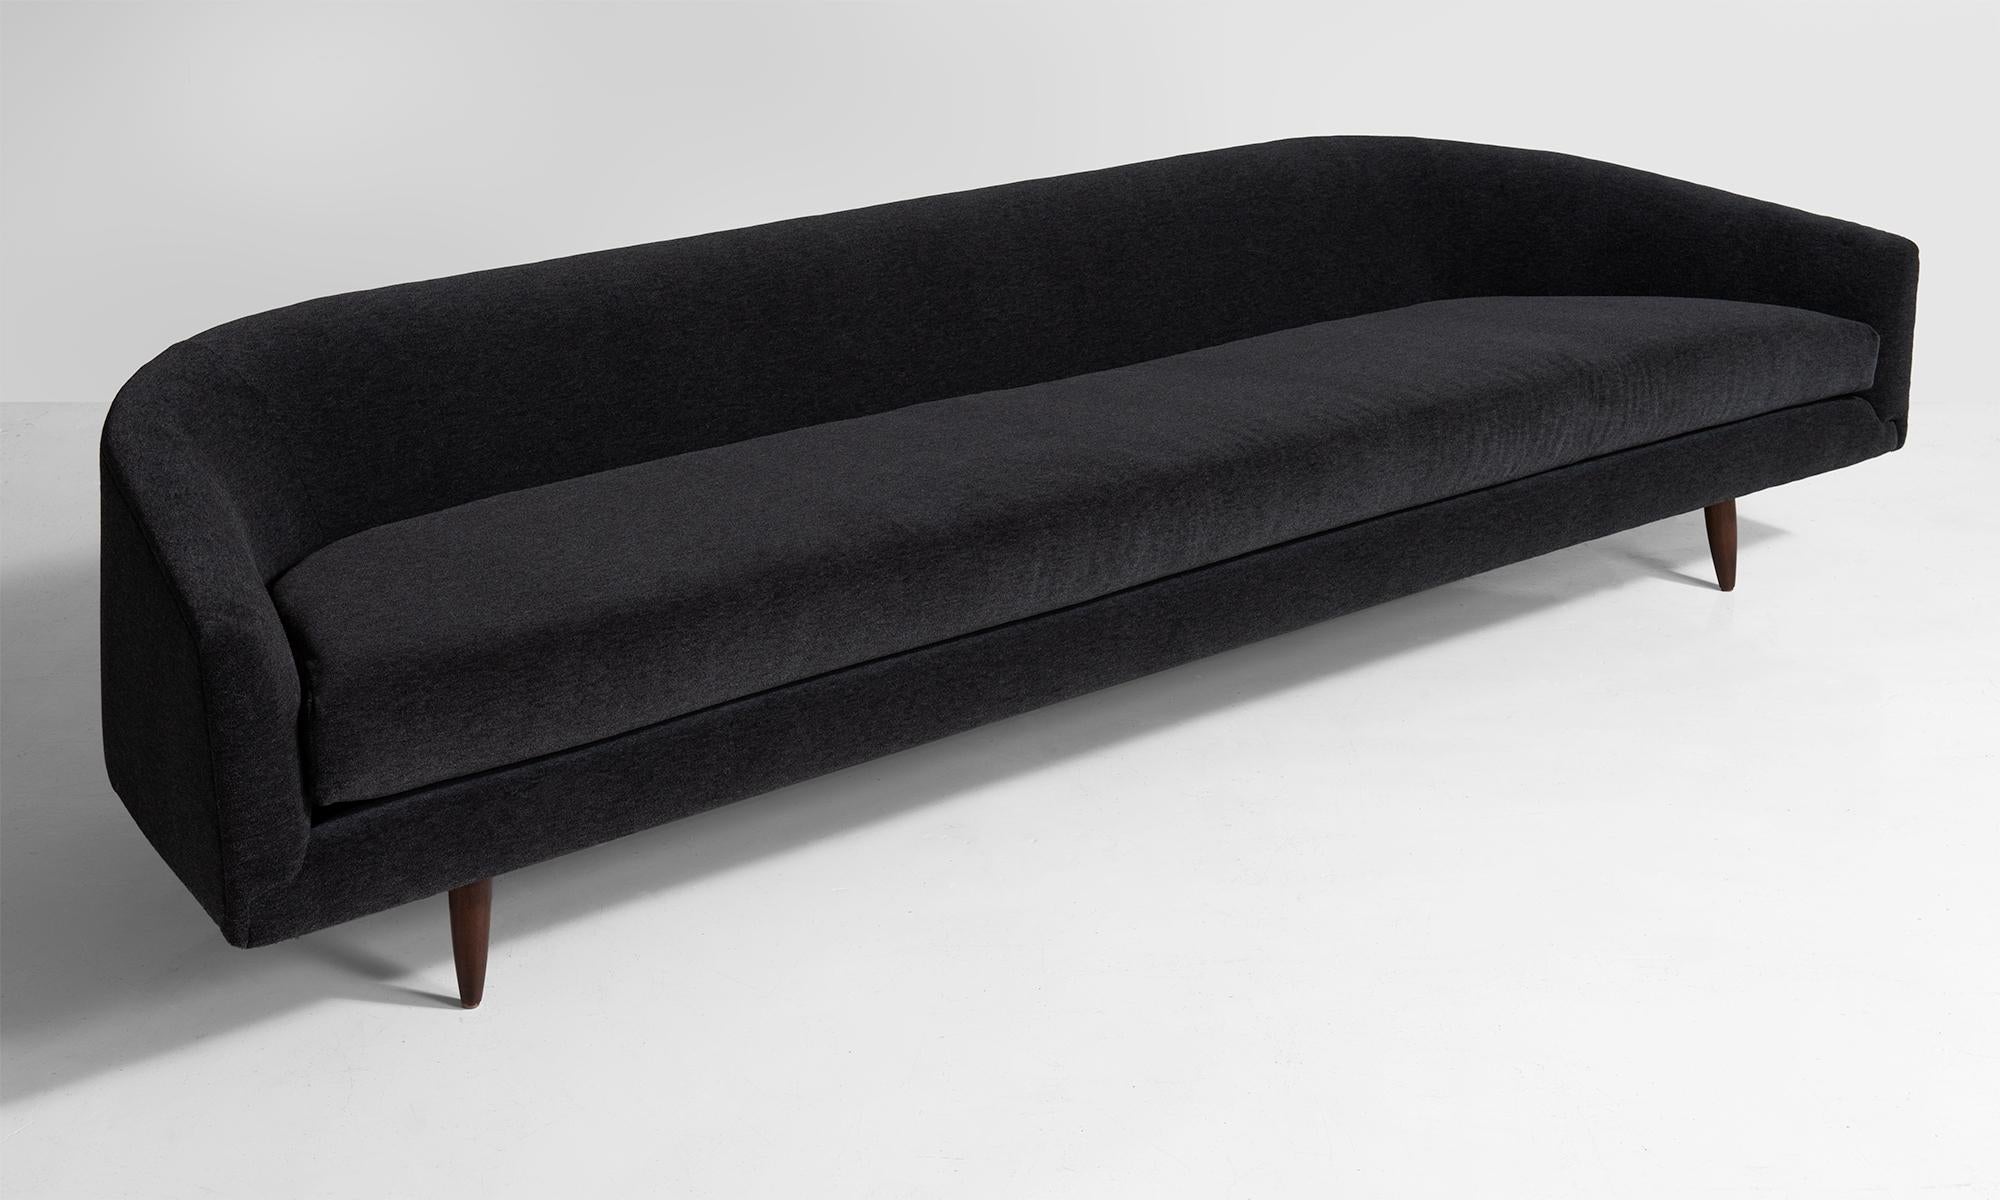 Adrian Pearsall cloud sofa, America, circa 1960.

Designed by Adrian Pearsall, manufactured by Craft Associates. Elegant design, reupholstered in Maharam Mohair Supreme, on walnut legs.